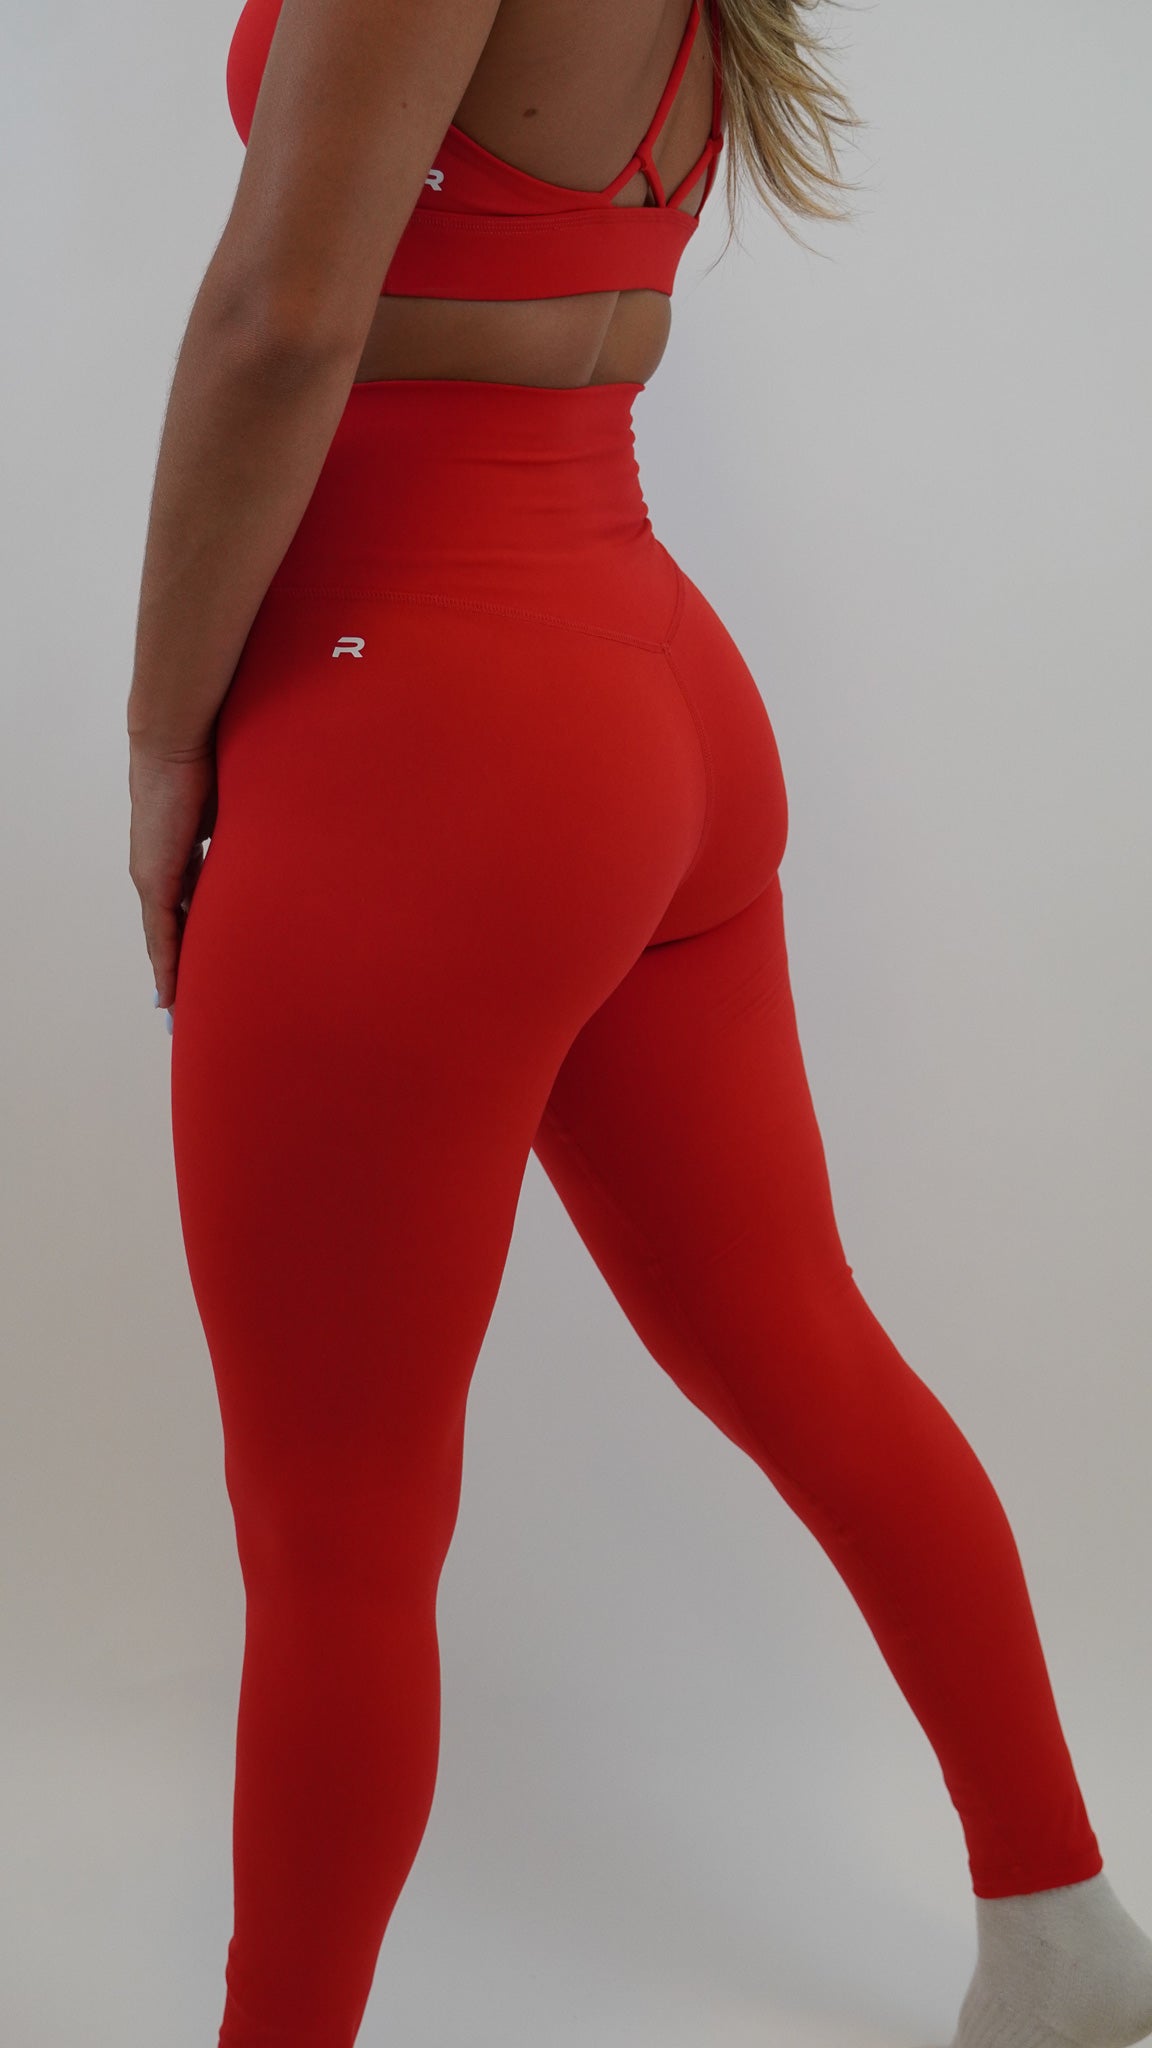 Functional Performance Legging - Resilient Active